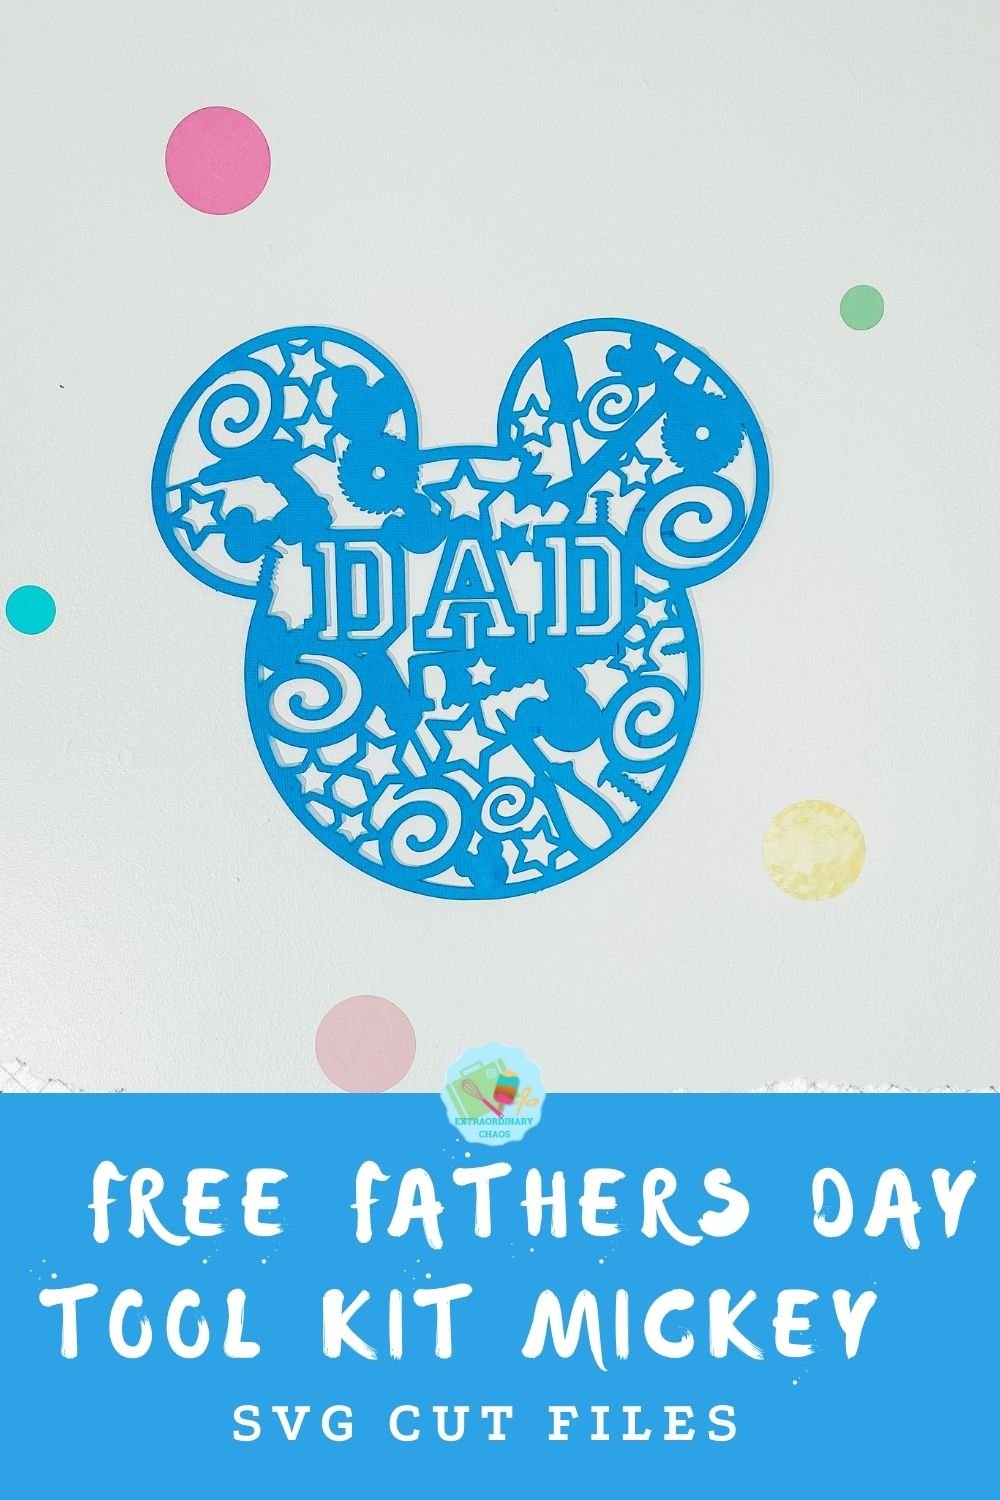 Free Fathers Day Tool Kit Mickey SVG Cut Files